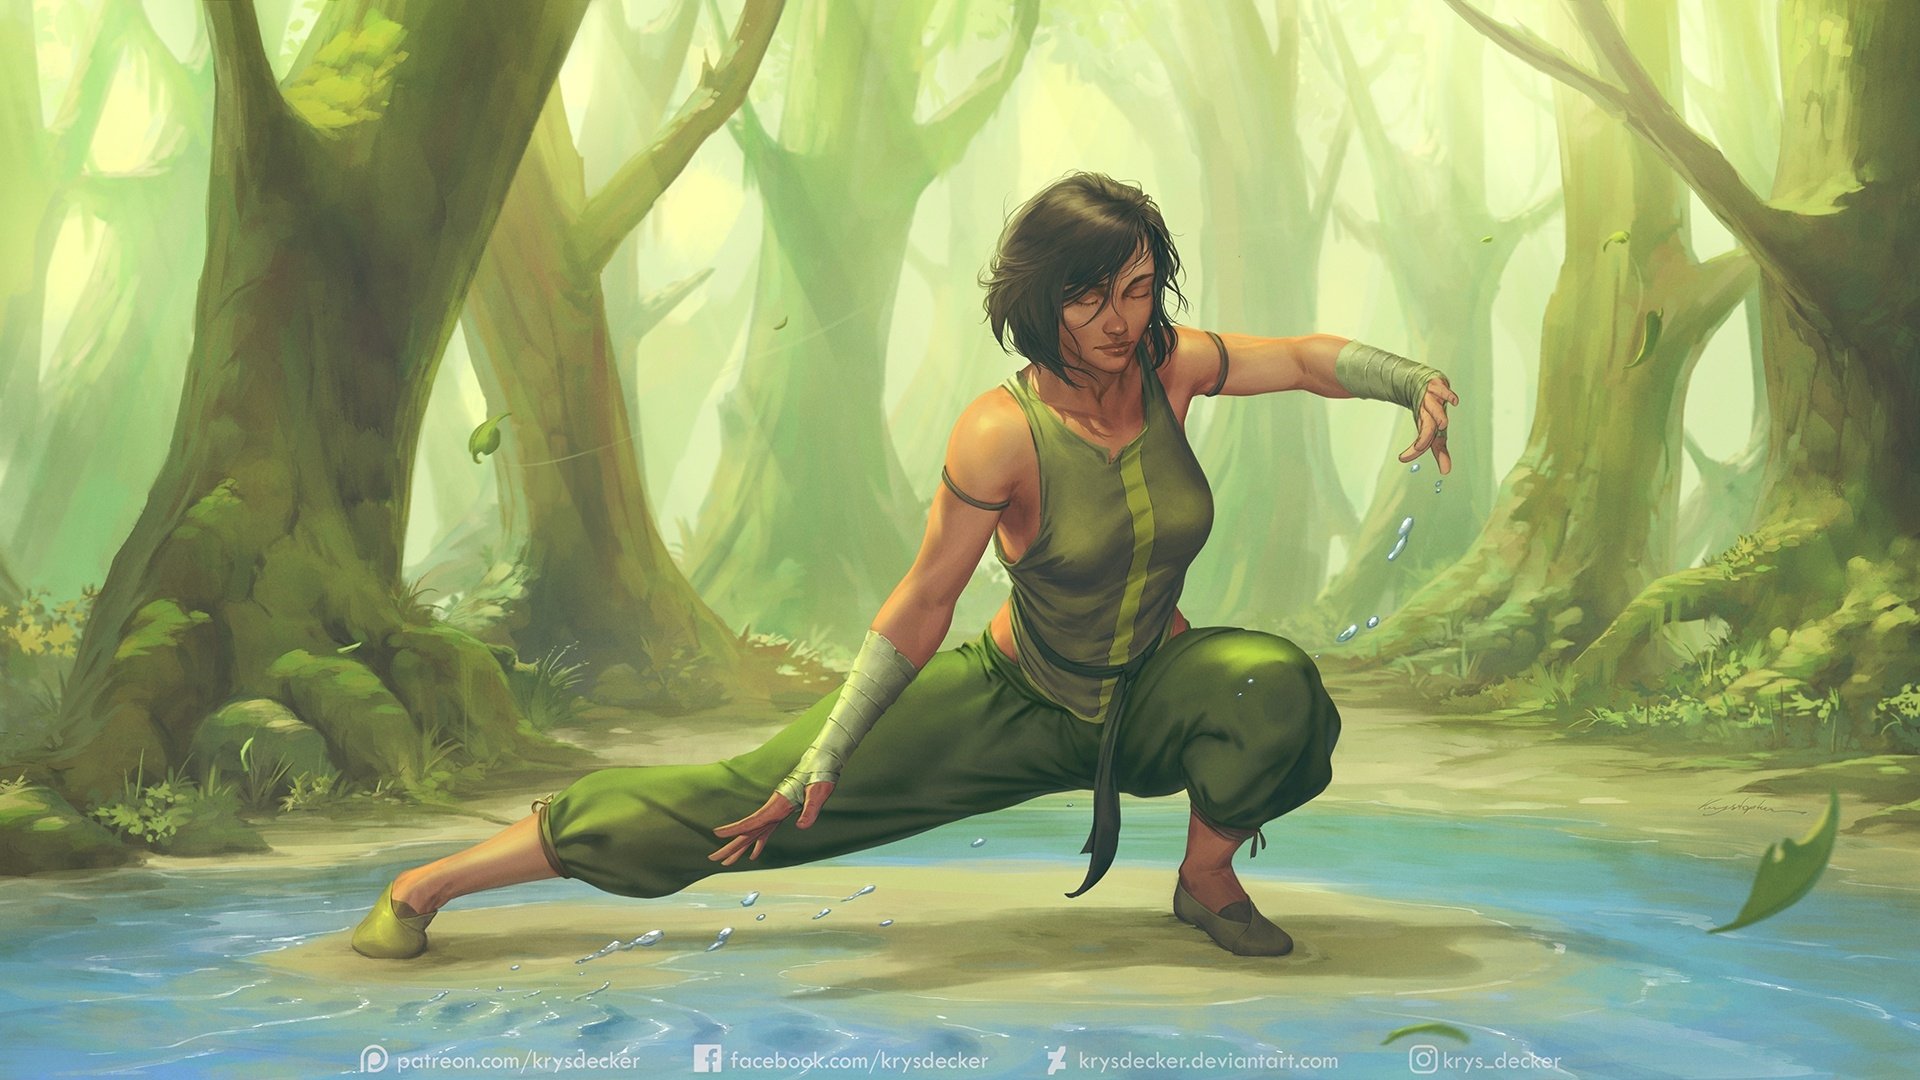 Avatar The Legend Of Korra Hd Wallpaper Background Image Images, Photos, Reviews